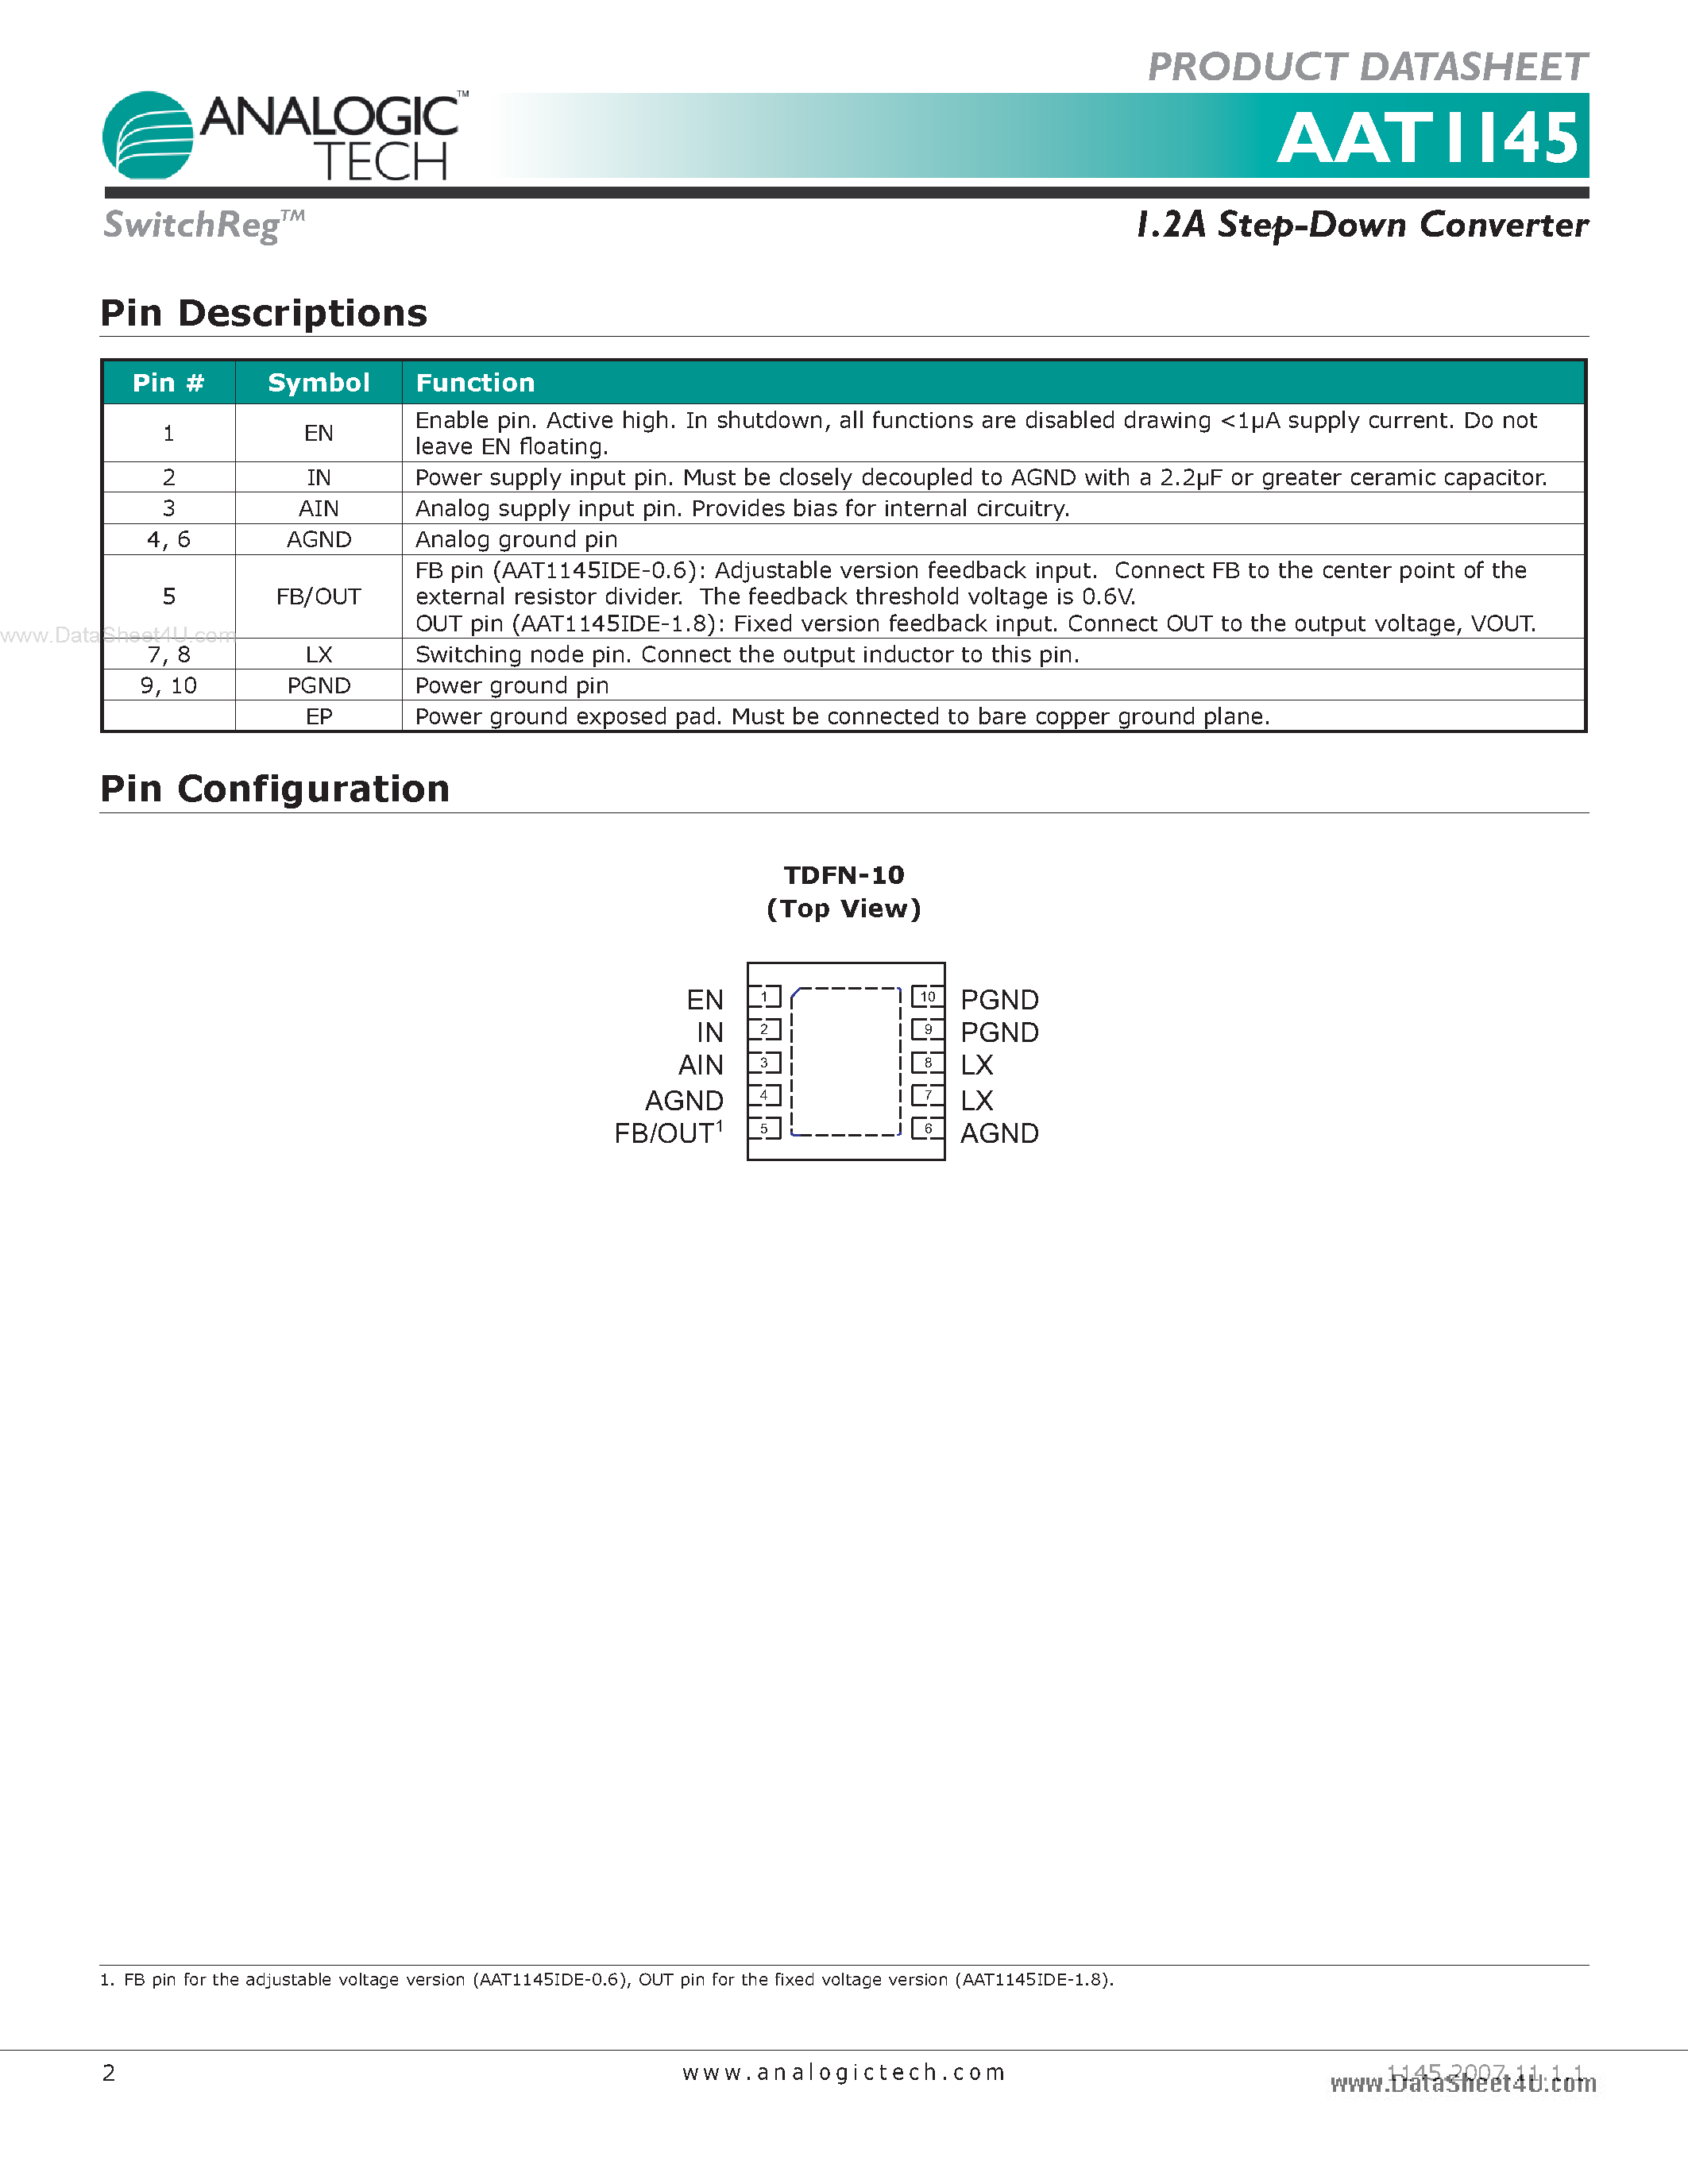 Datasheet AAT1145 - 1.2A Step-Down Converter page 2